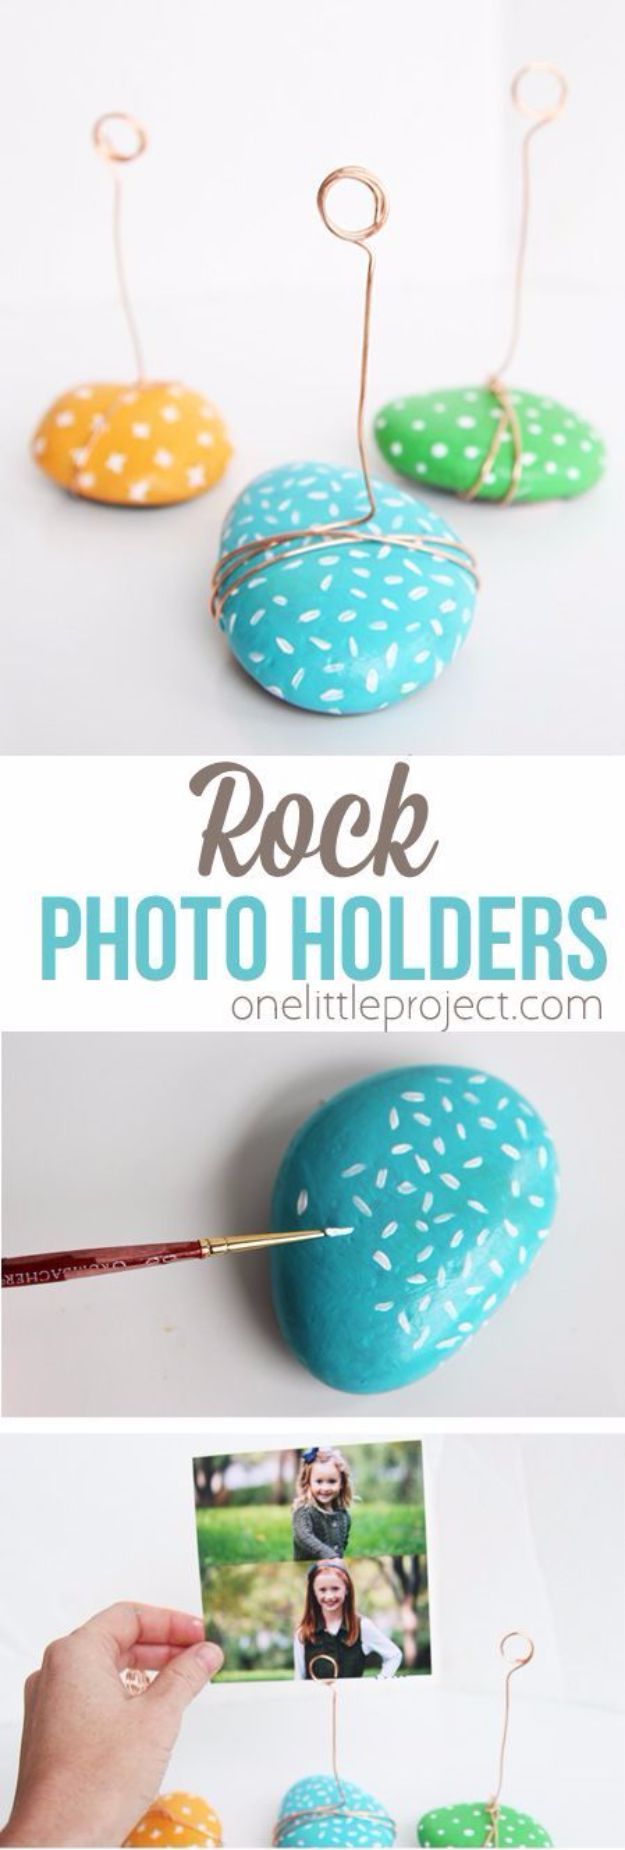 Crafts for Teens to Make and Sell - DIY Rock Photo Holder - Cheap and Easy DIY Ideas To Make For Extra Money - Best Things to Sell On Etsy, Dollar Store Craft Ideas, Quick Projects for Teenagers To Make Spending Cash - DIY Gifts, Wall Art, School Supplies, Room Decor, Jewelry, Fashion, Hair Accessories, Bracelets, Magnets http://diyprojectsforteens.com/crafts-to-sell-teens